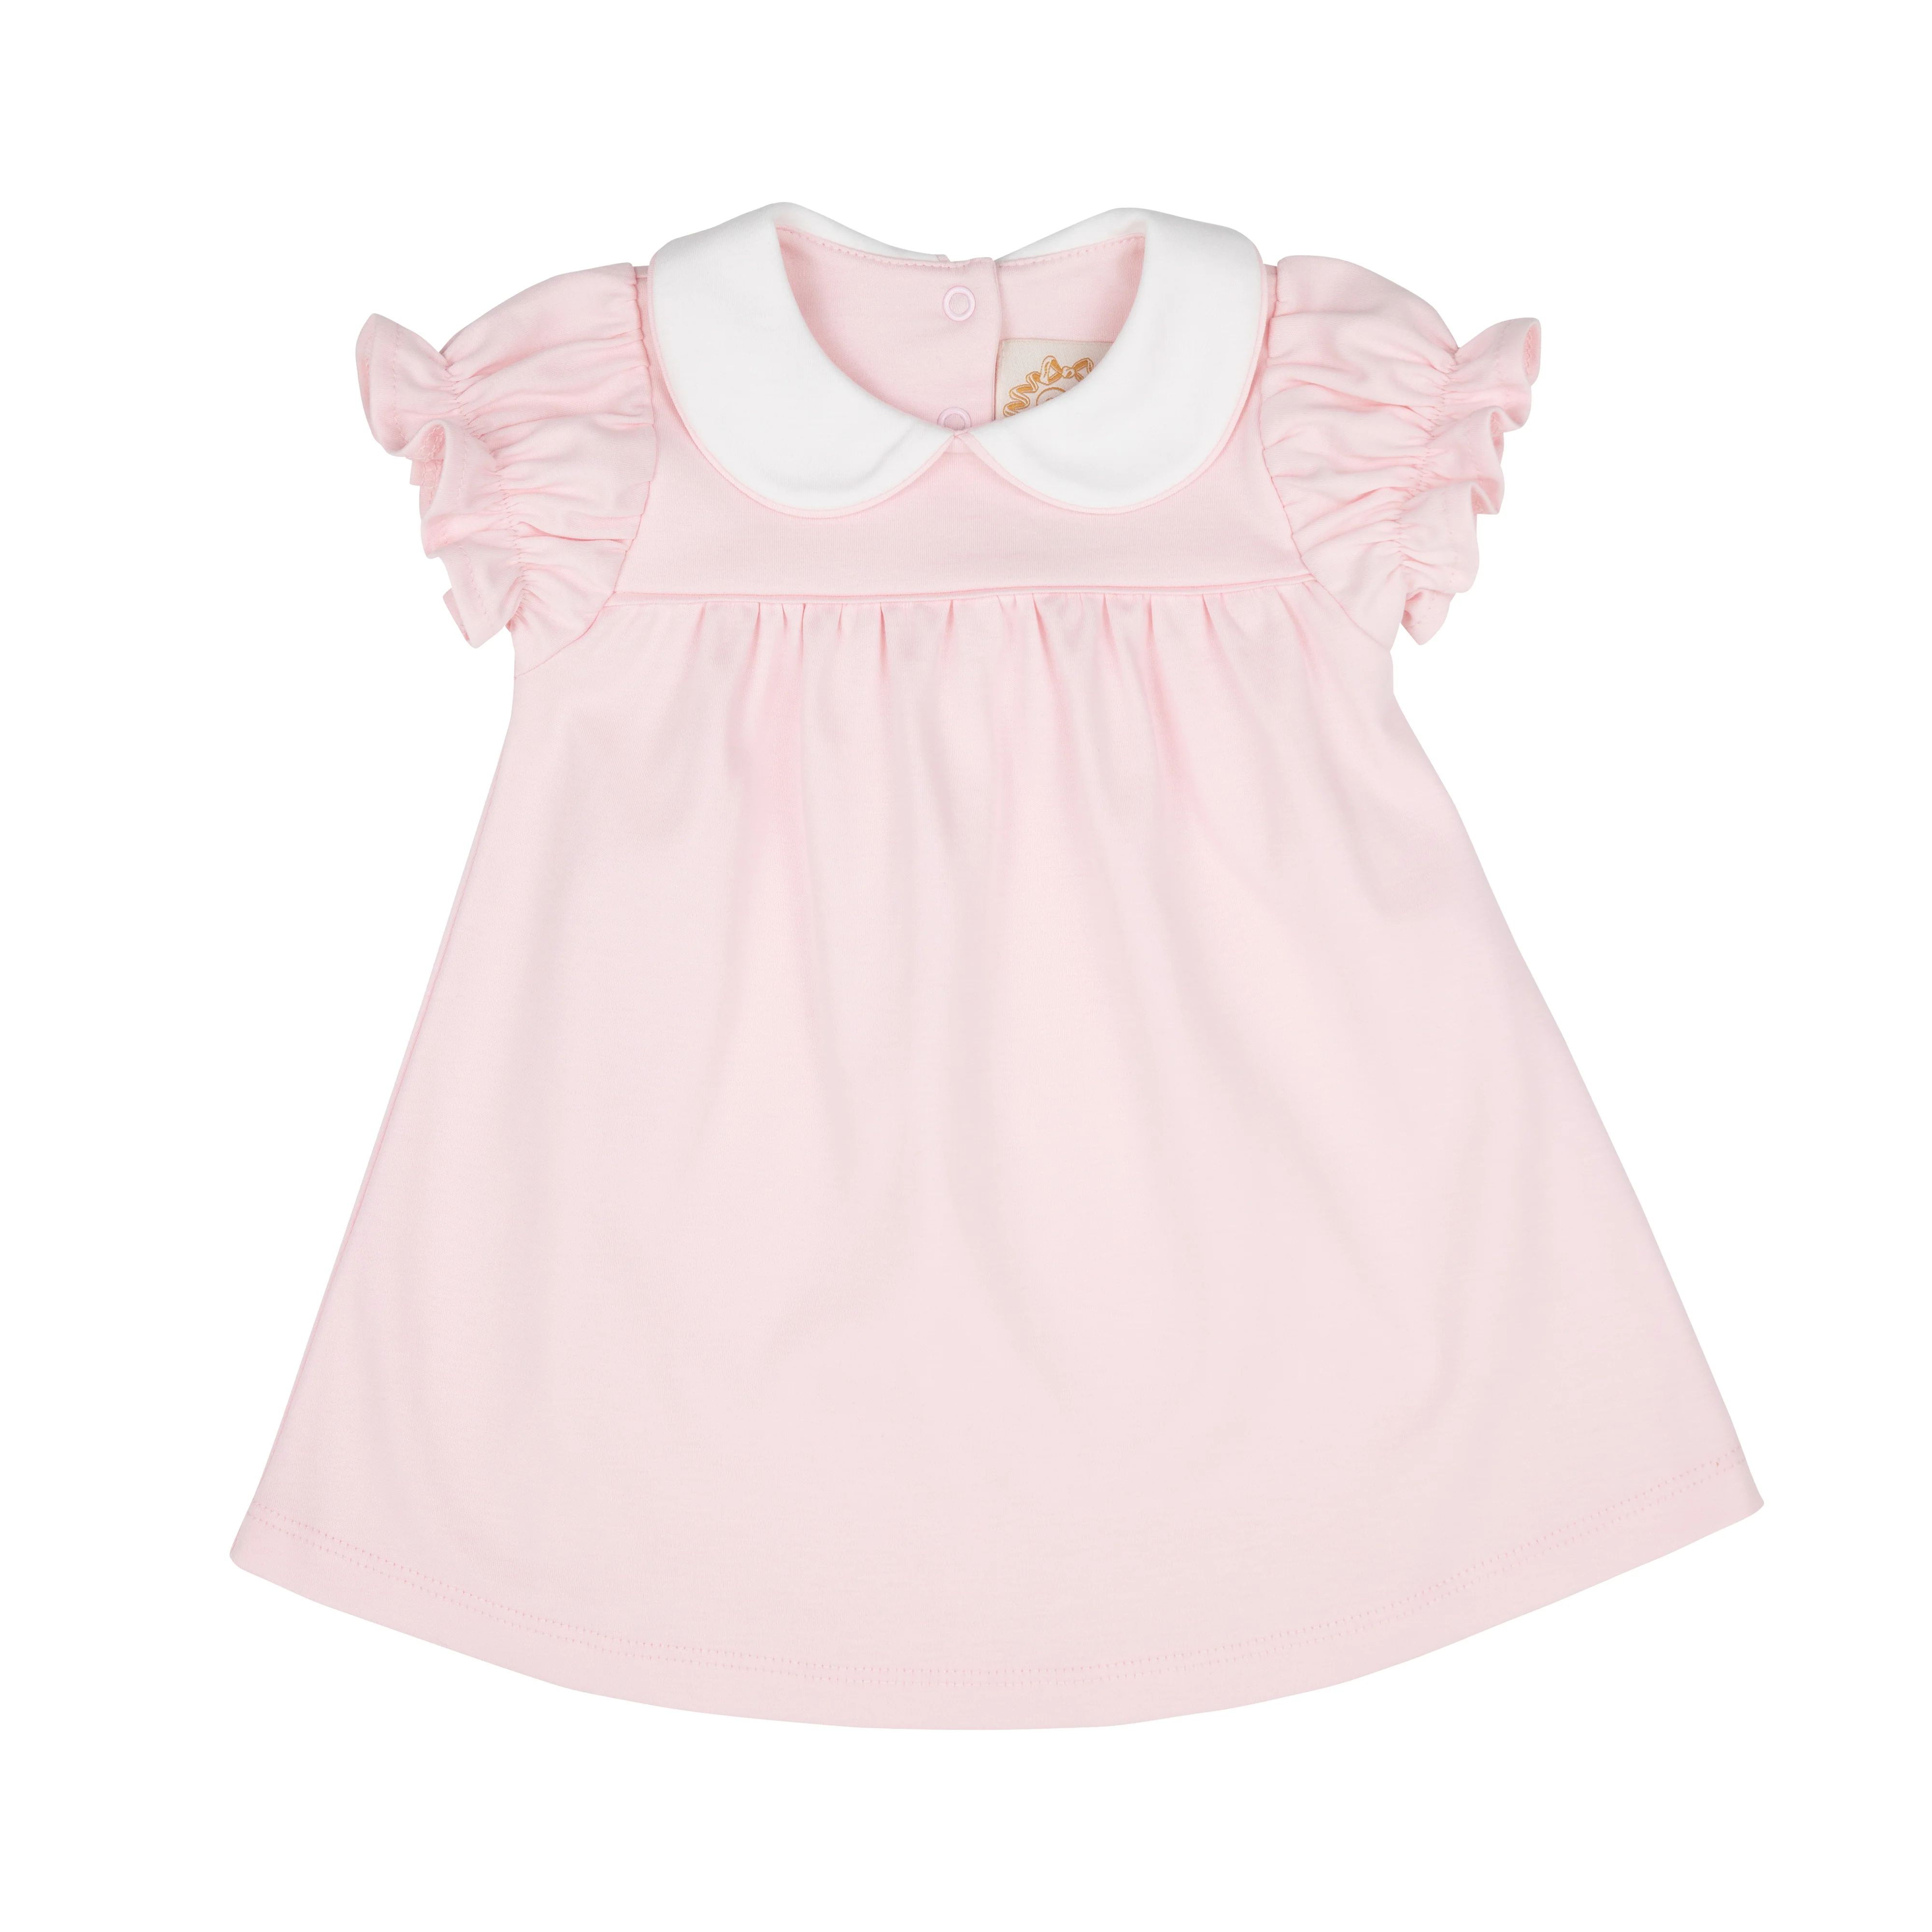 Holly Day Dress - Palm Beach Pink with Worth Avenue White | The Beaufort Bonnet Company